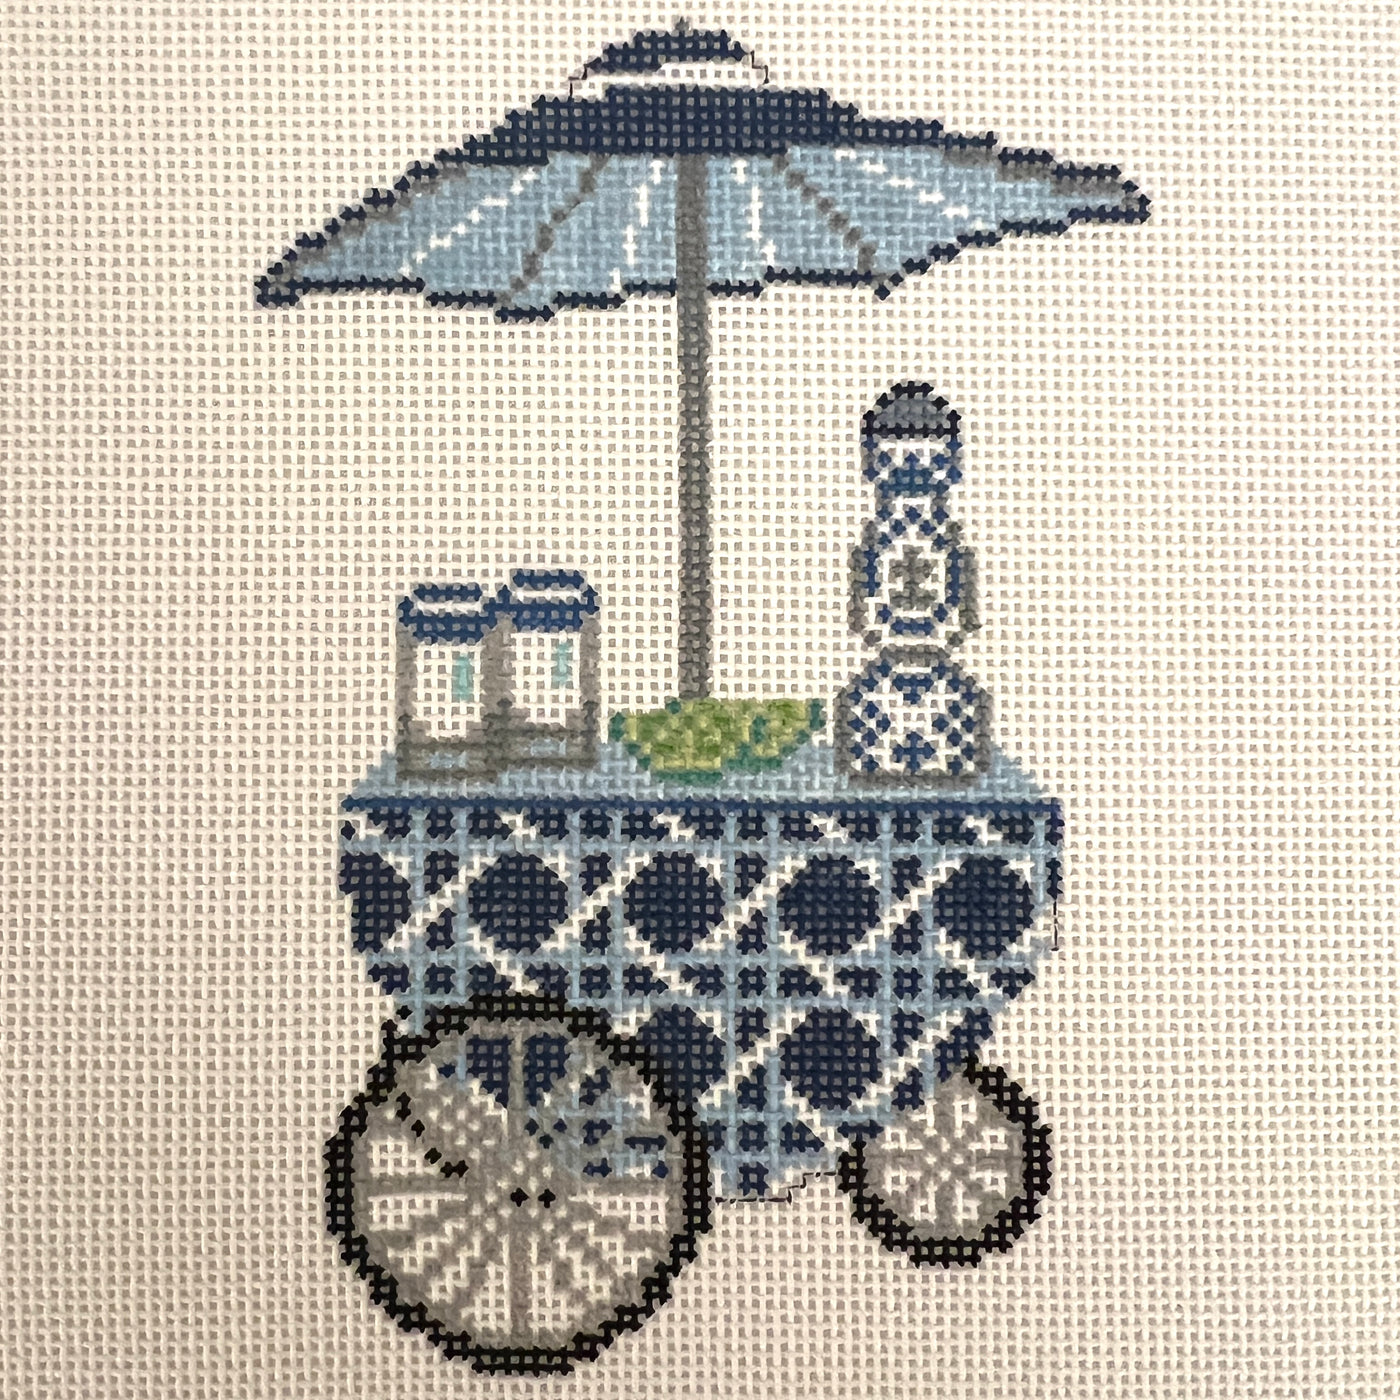 Blue Cane Tequila Cart Needlepoint Canvas